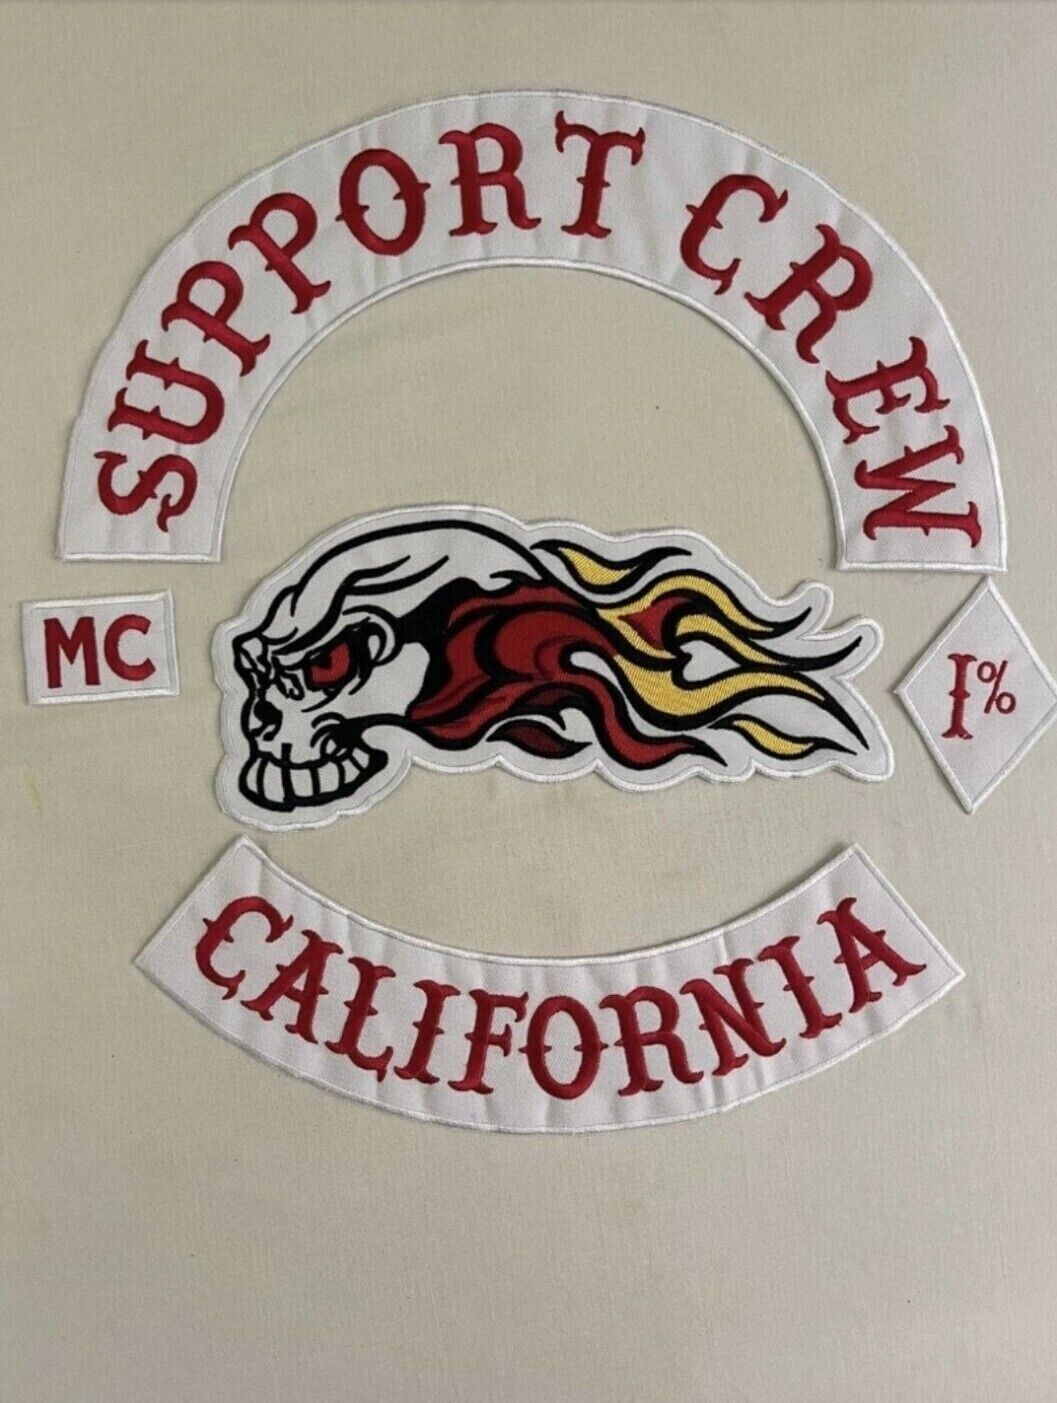 Support crew California and Arizona choose one mc 35cm iron on embroidered set